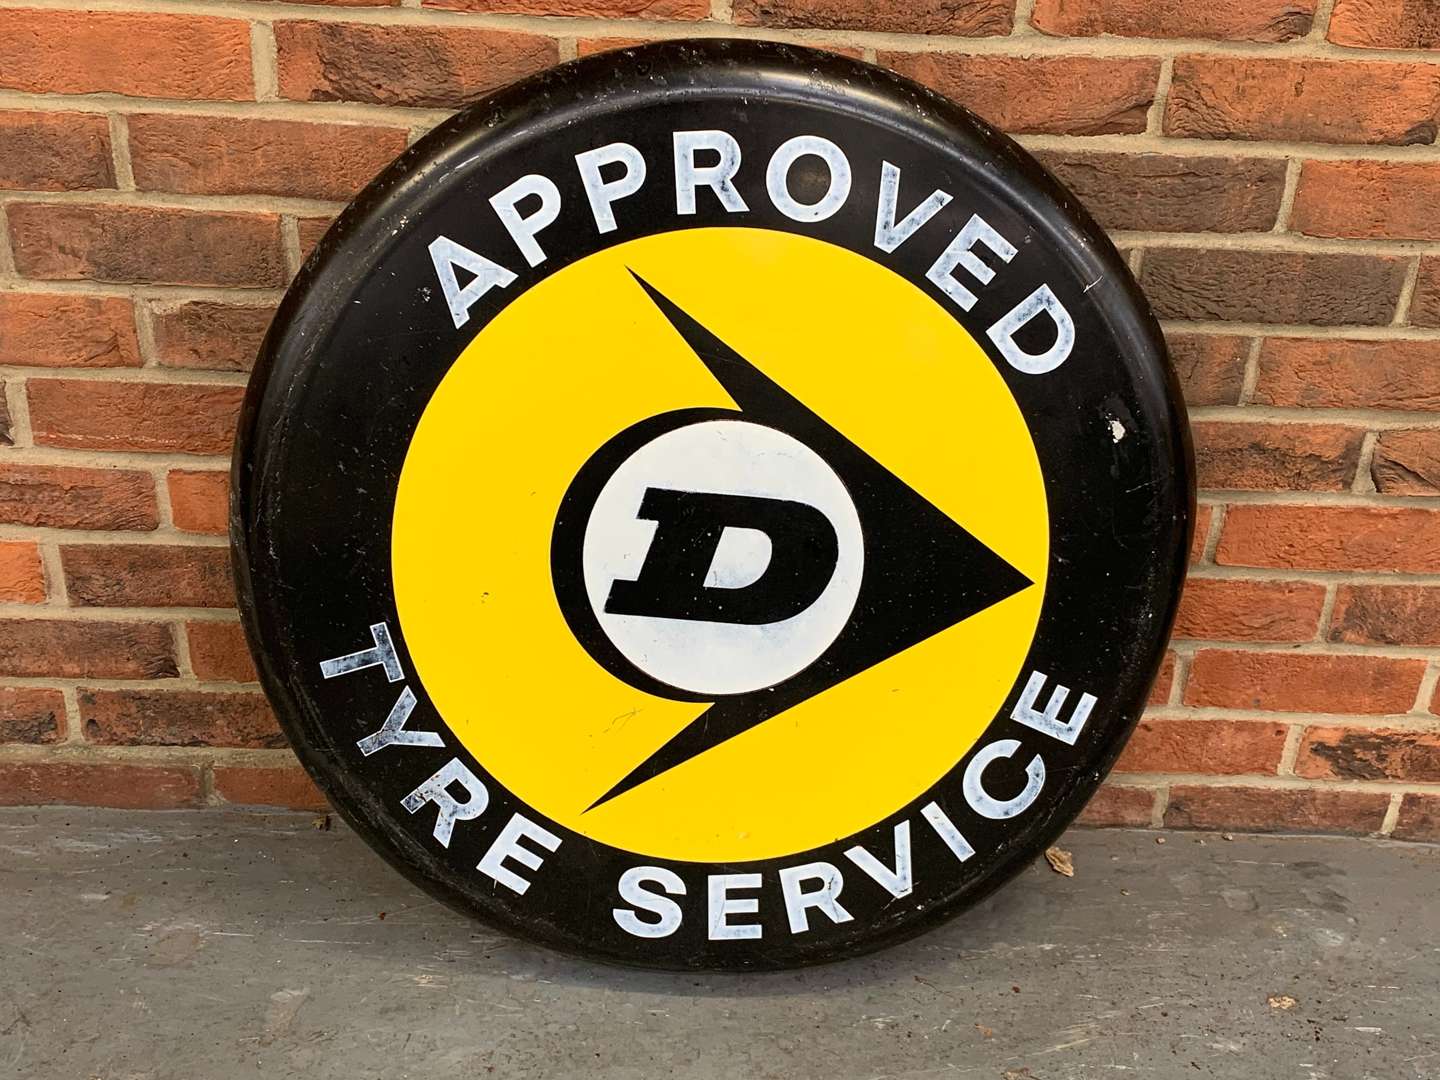 <p>Dunlop Approved Tyre Service Convex Aluminium Sign</p>